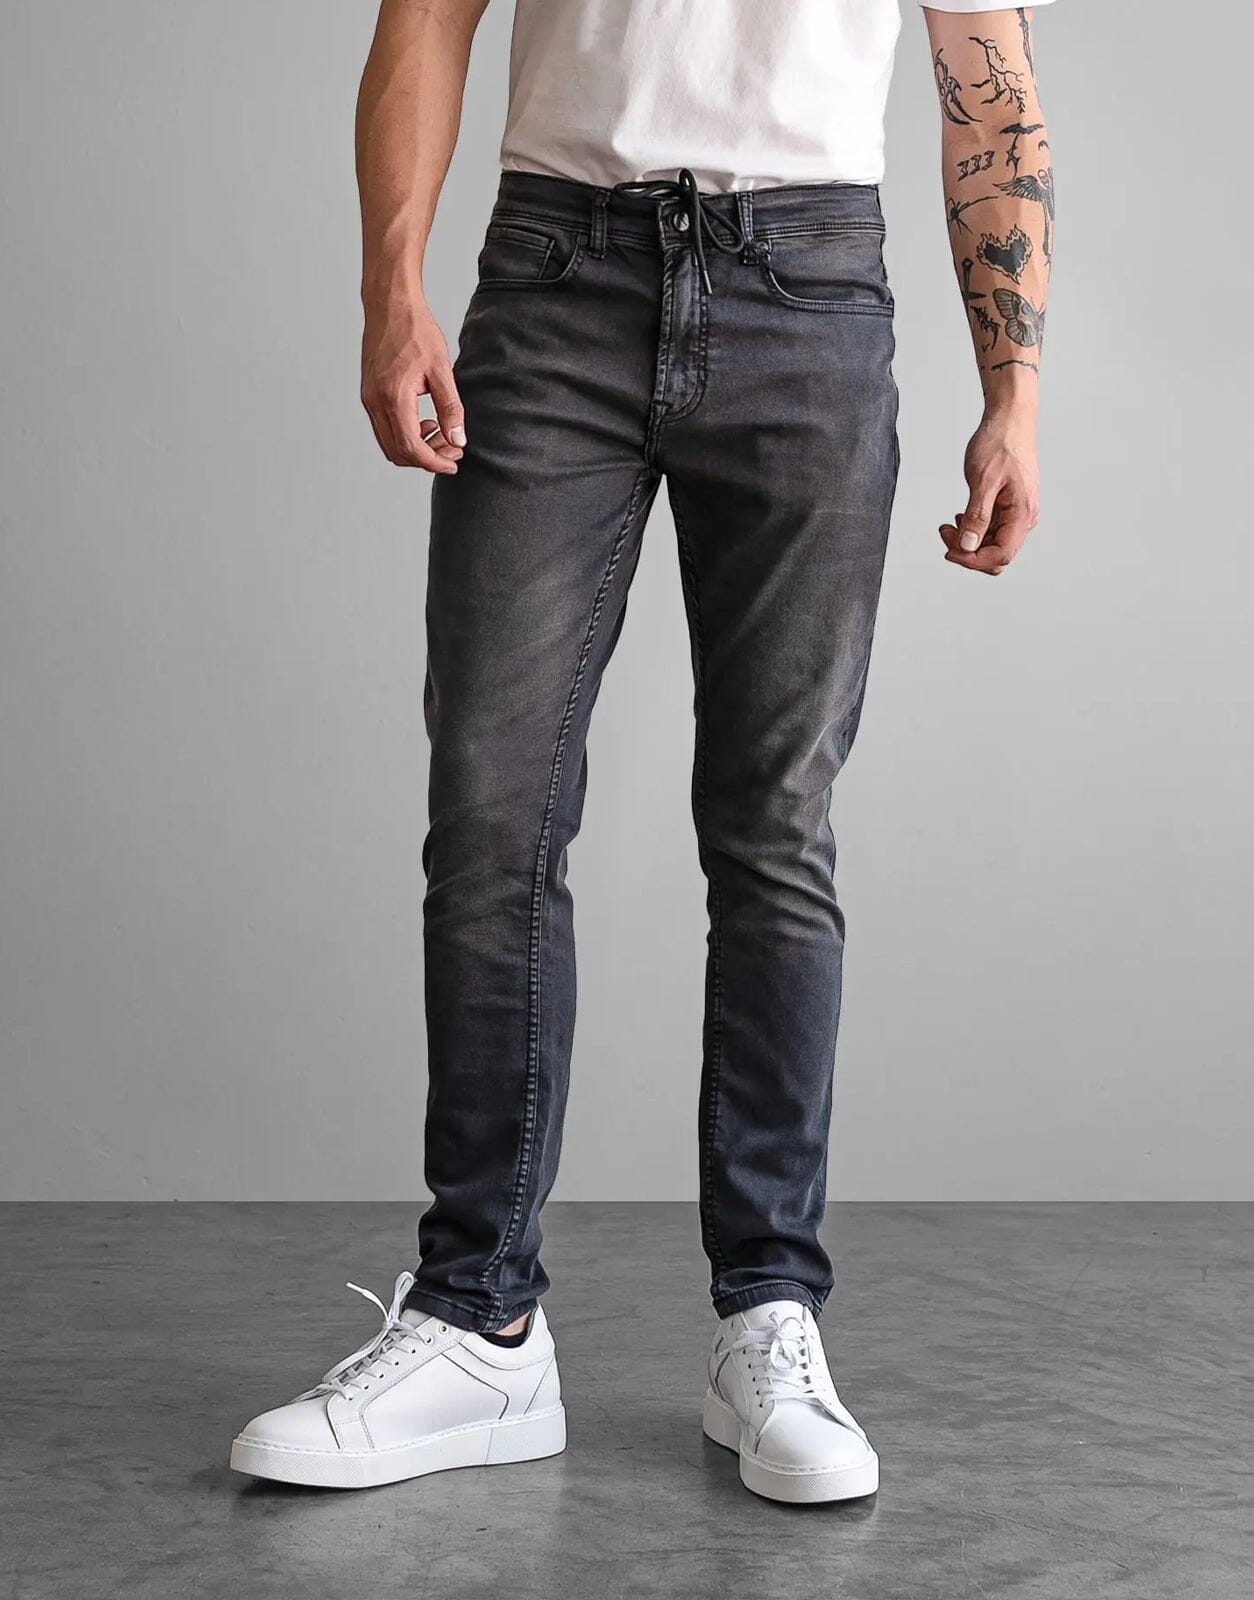 Fade Iconic Carbon Charcoal Jeans - Subwear